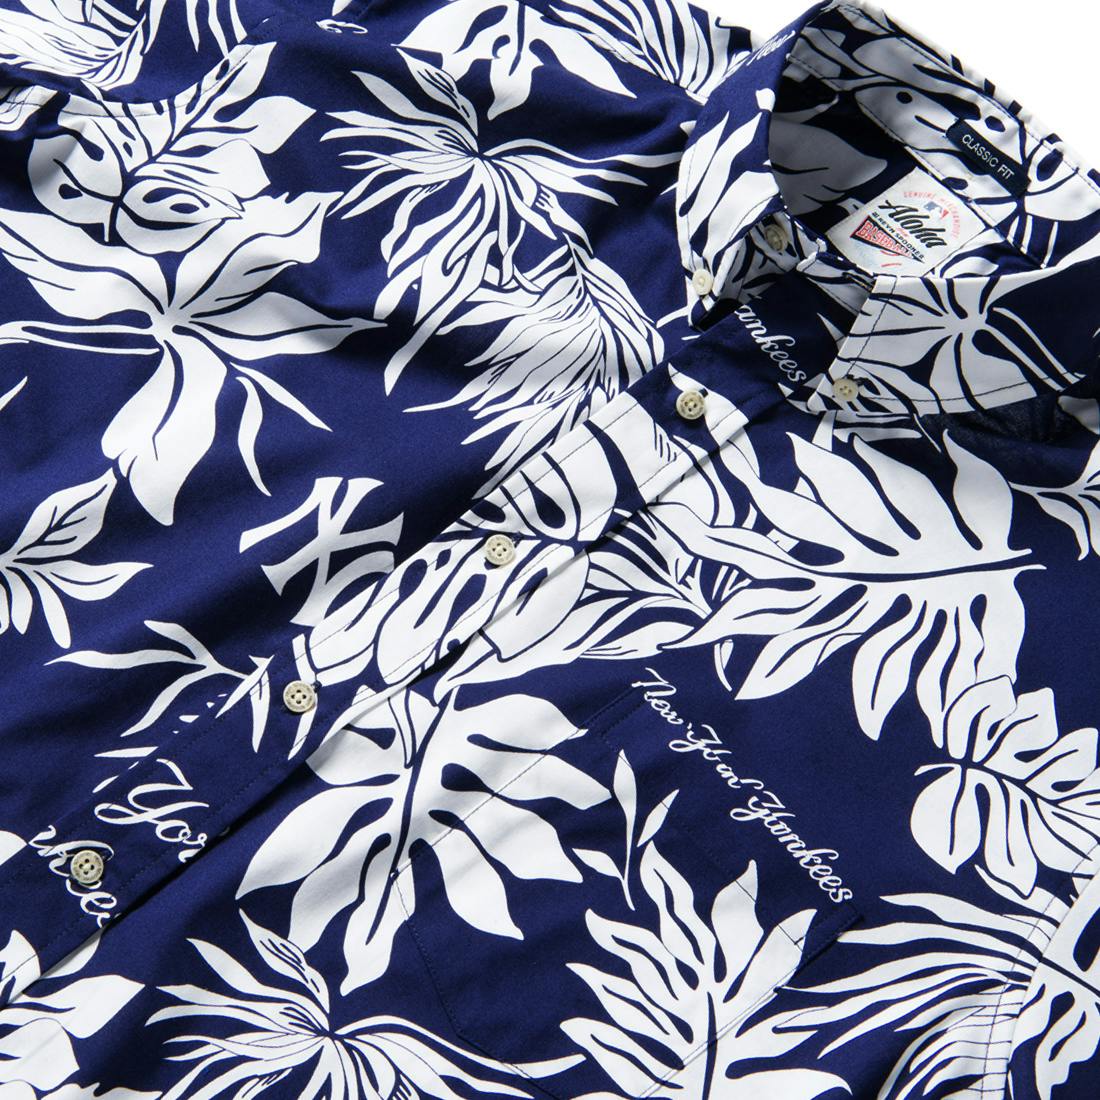 Reyn Spooner Blue/White MLB NY Yankees Classic Fit Hawaiian Shirt Size M.  for Sale in Pico Rivera, CA - OfferUp